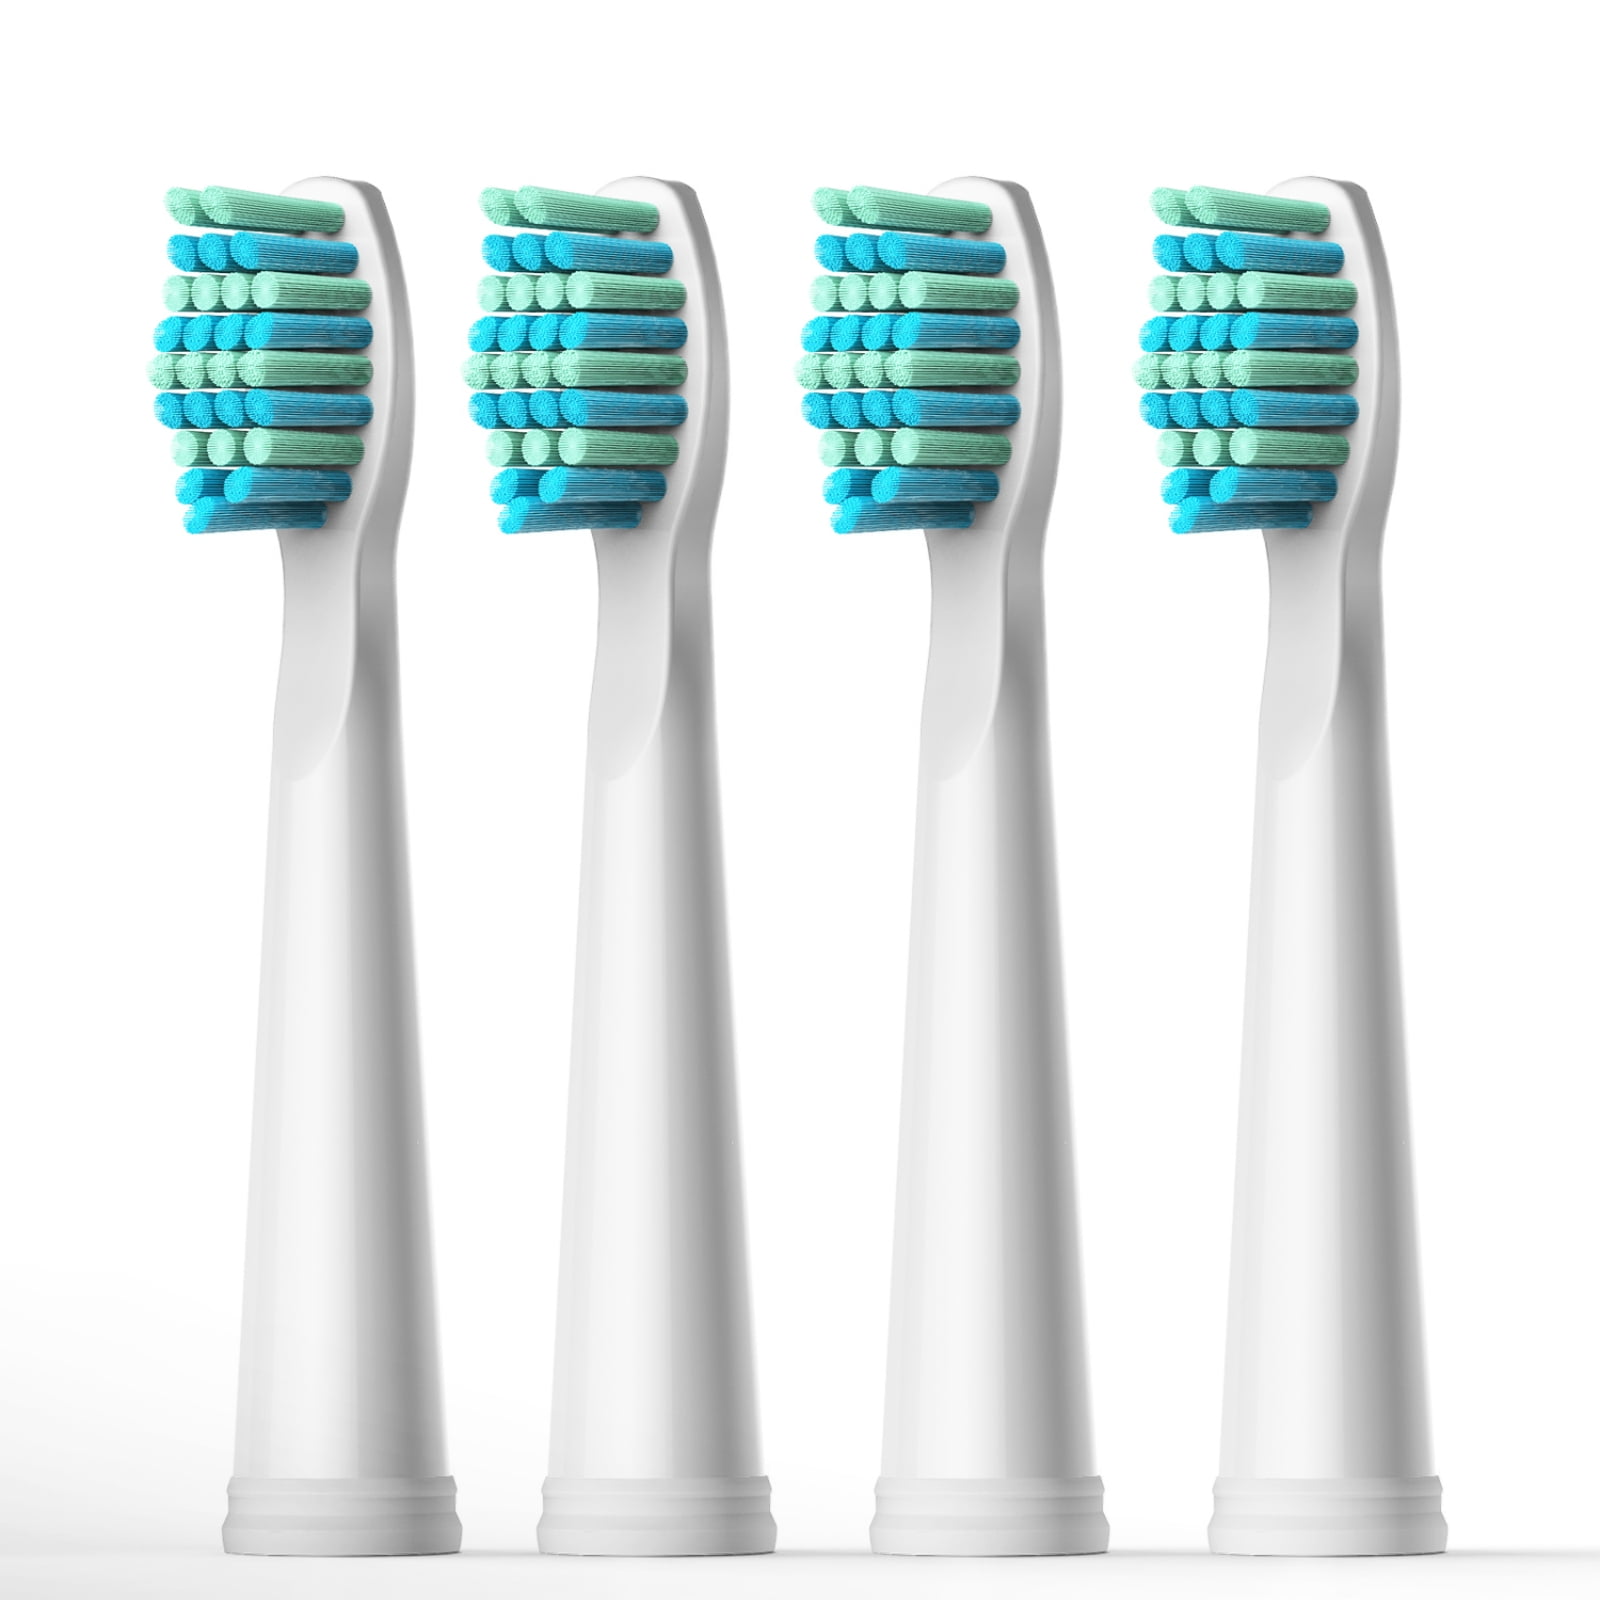 Fairywill 4pcs Sonic Electric Toothbrush Brush Heads, Replacement Toothbrush Heads for Fairywill D7 / D8 / 551 / 917